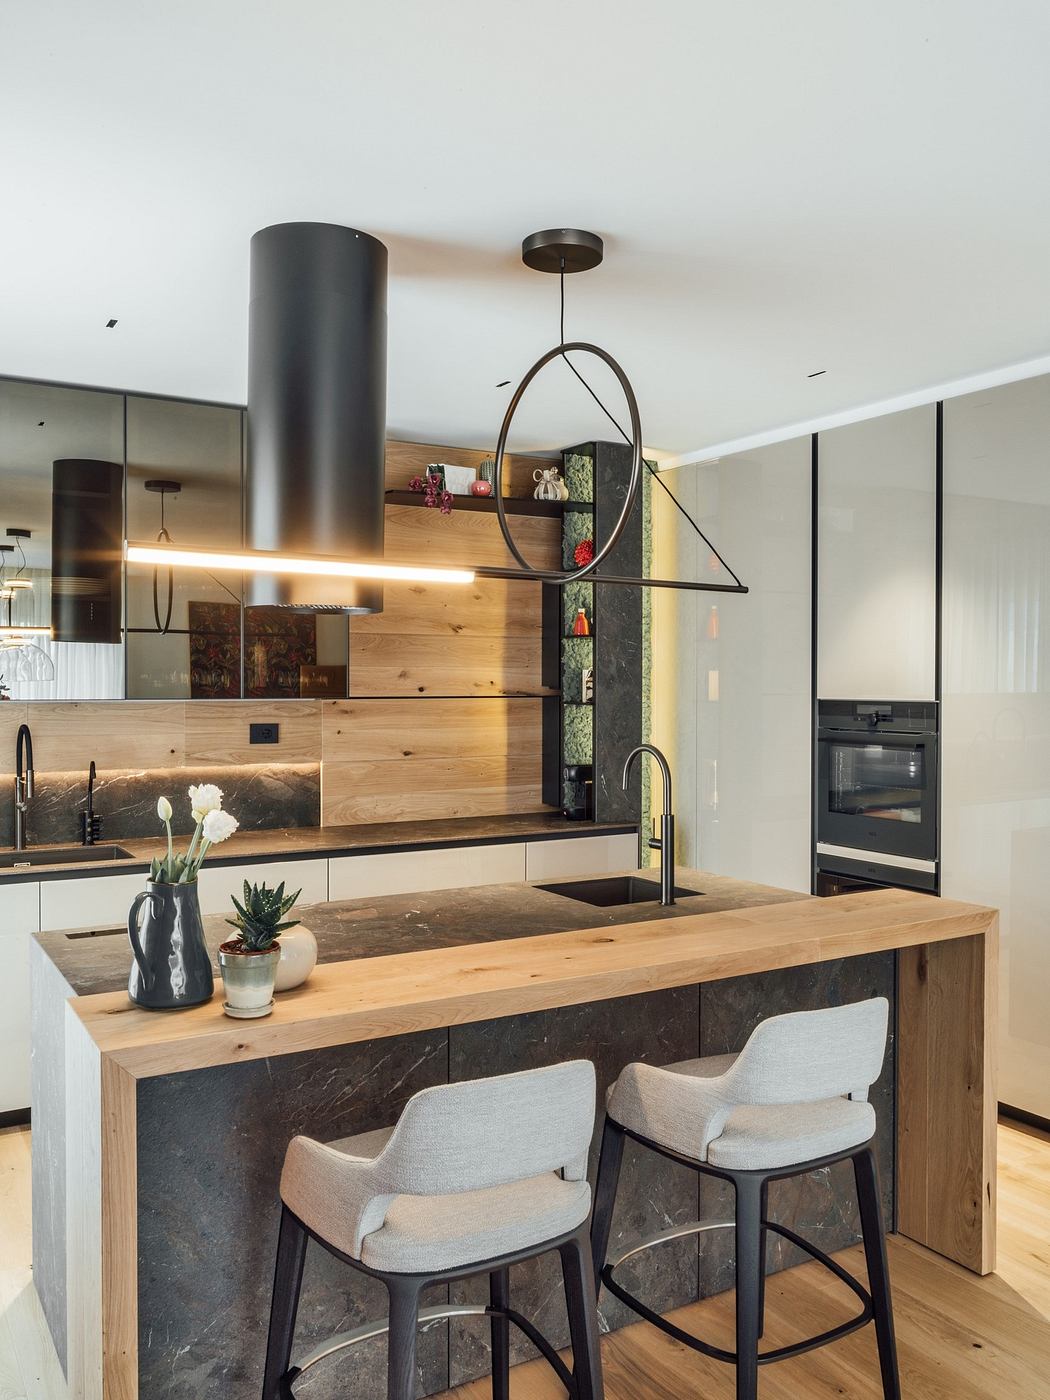 Modern kitchen with wood accents, island, and pendant lighting.